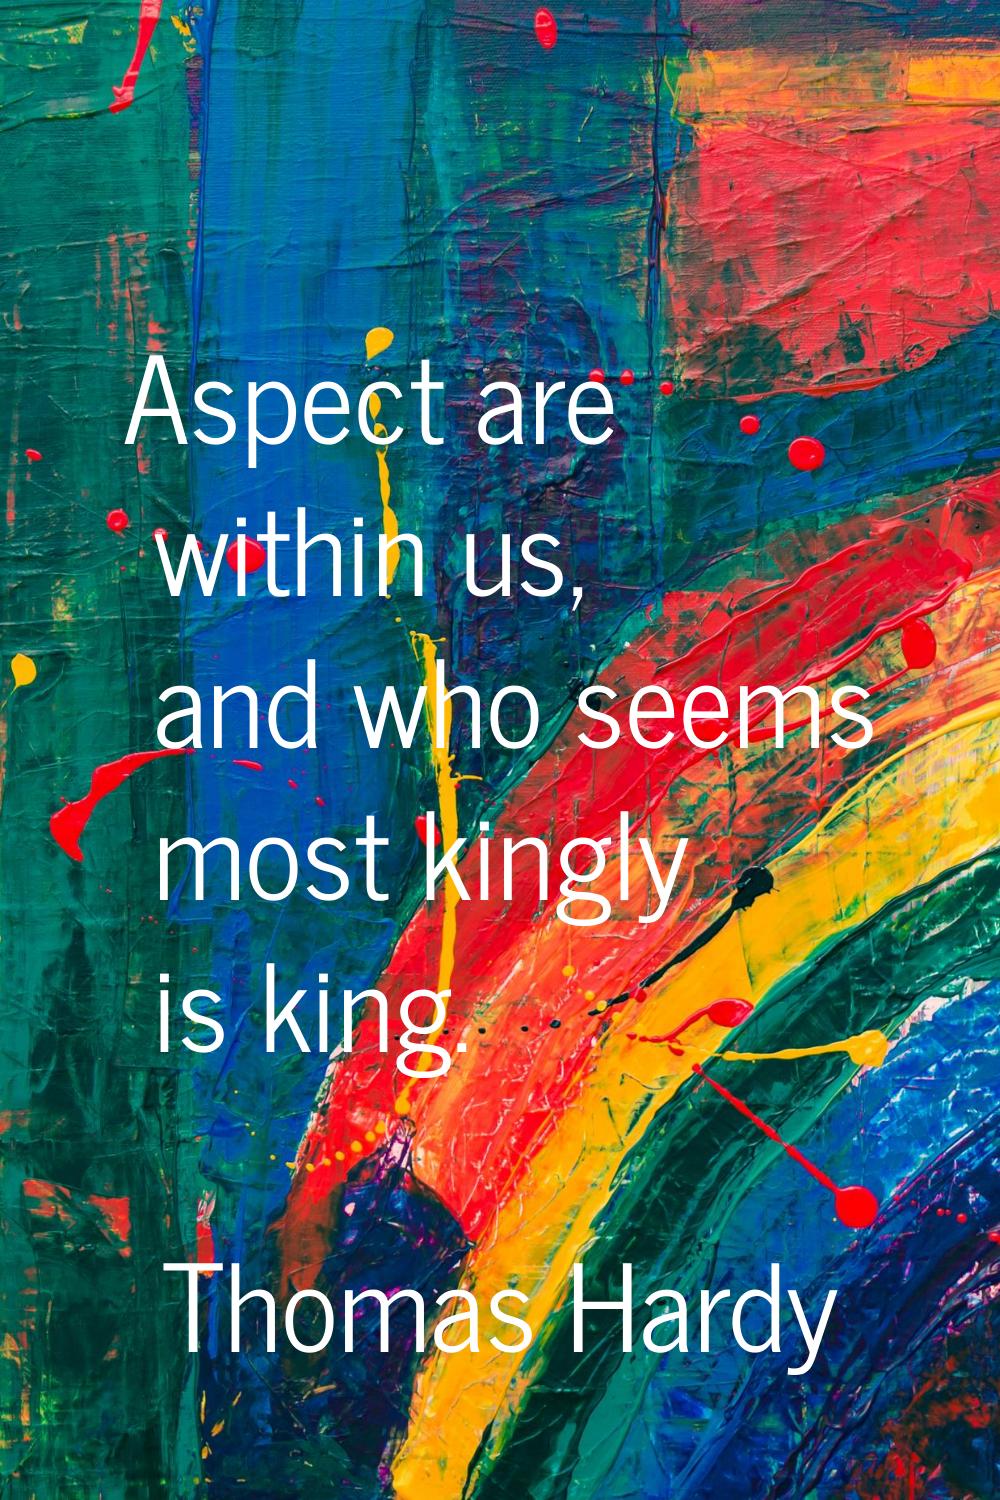 Aspect are within us, and who seems most kingly is king.